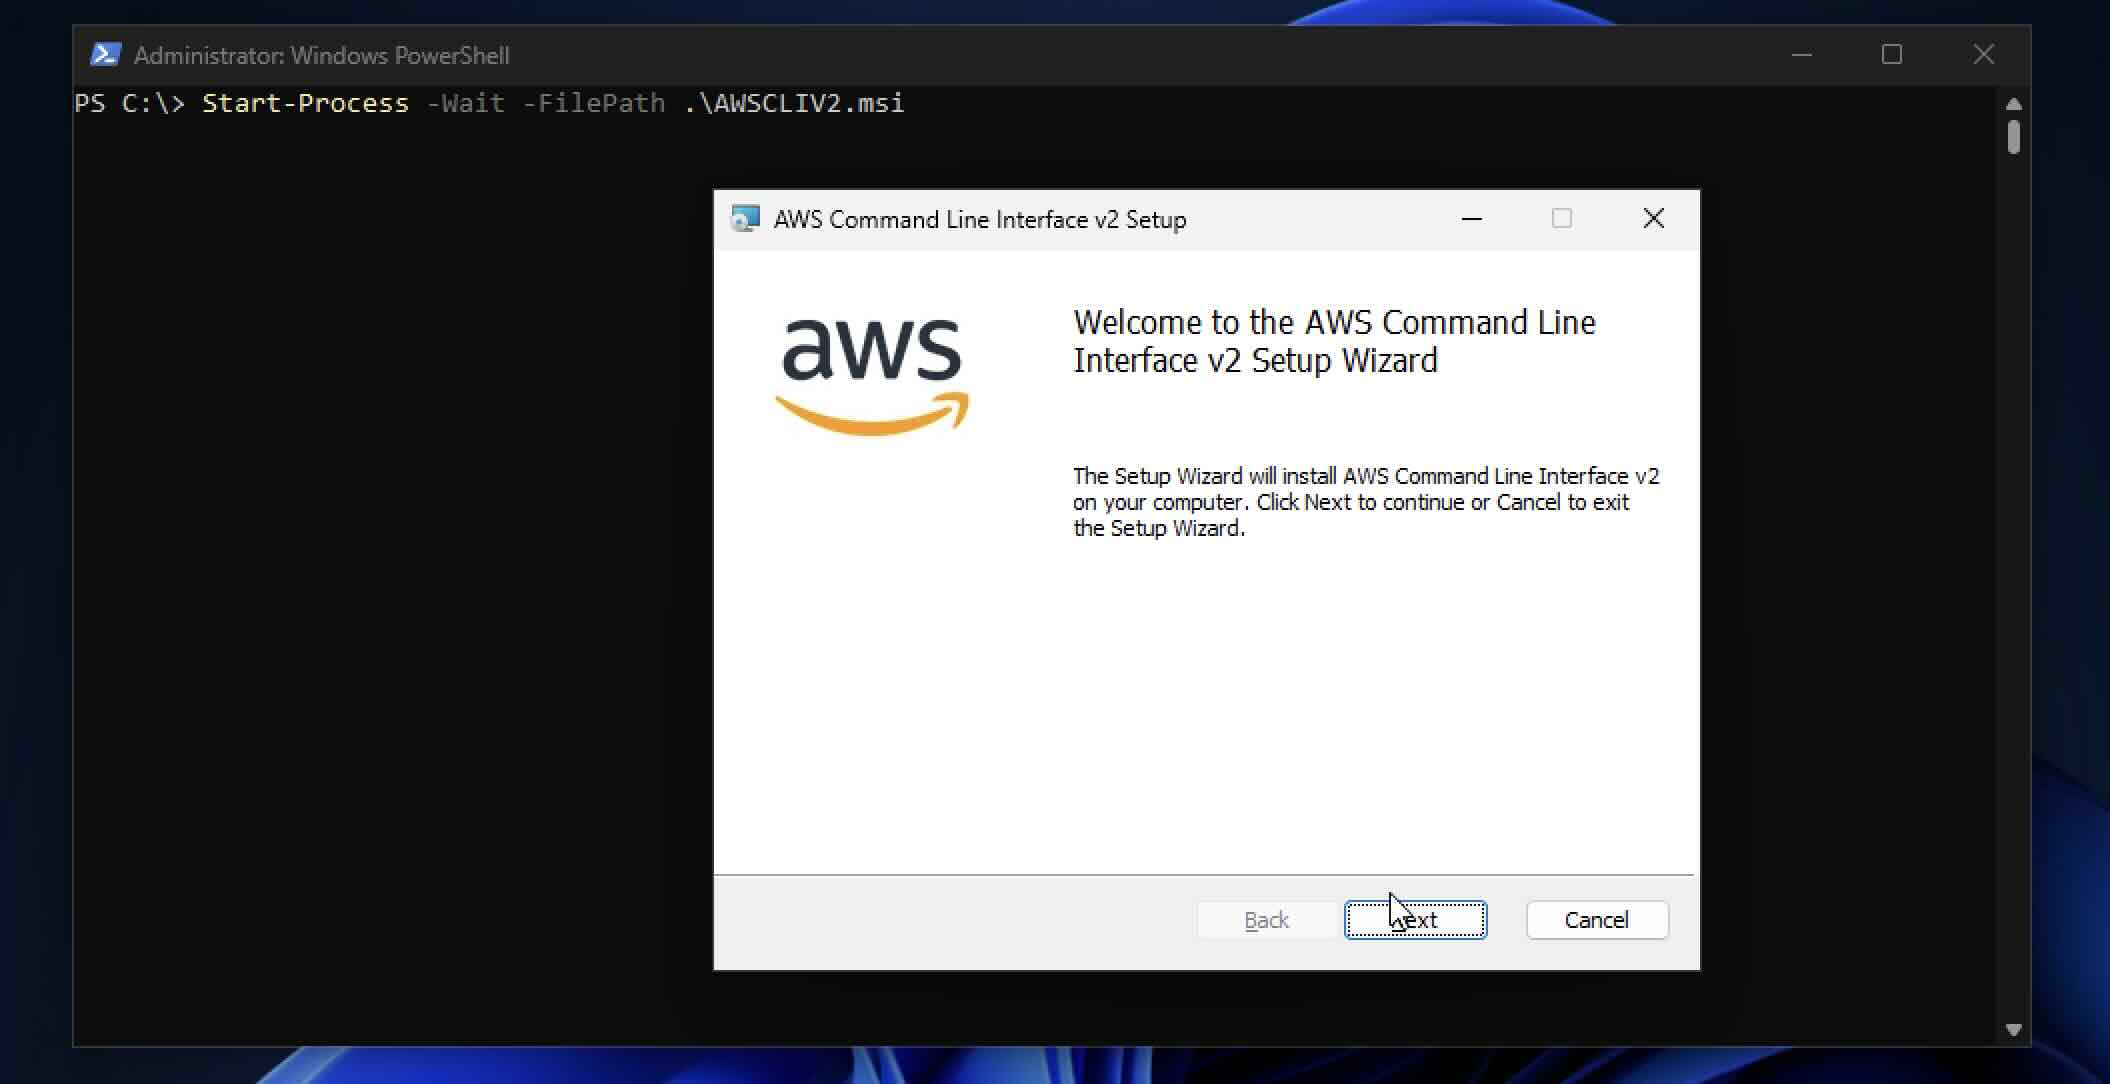 Welcome to the AWS Command Line Interface v2 Setup Wizard